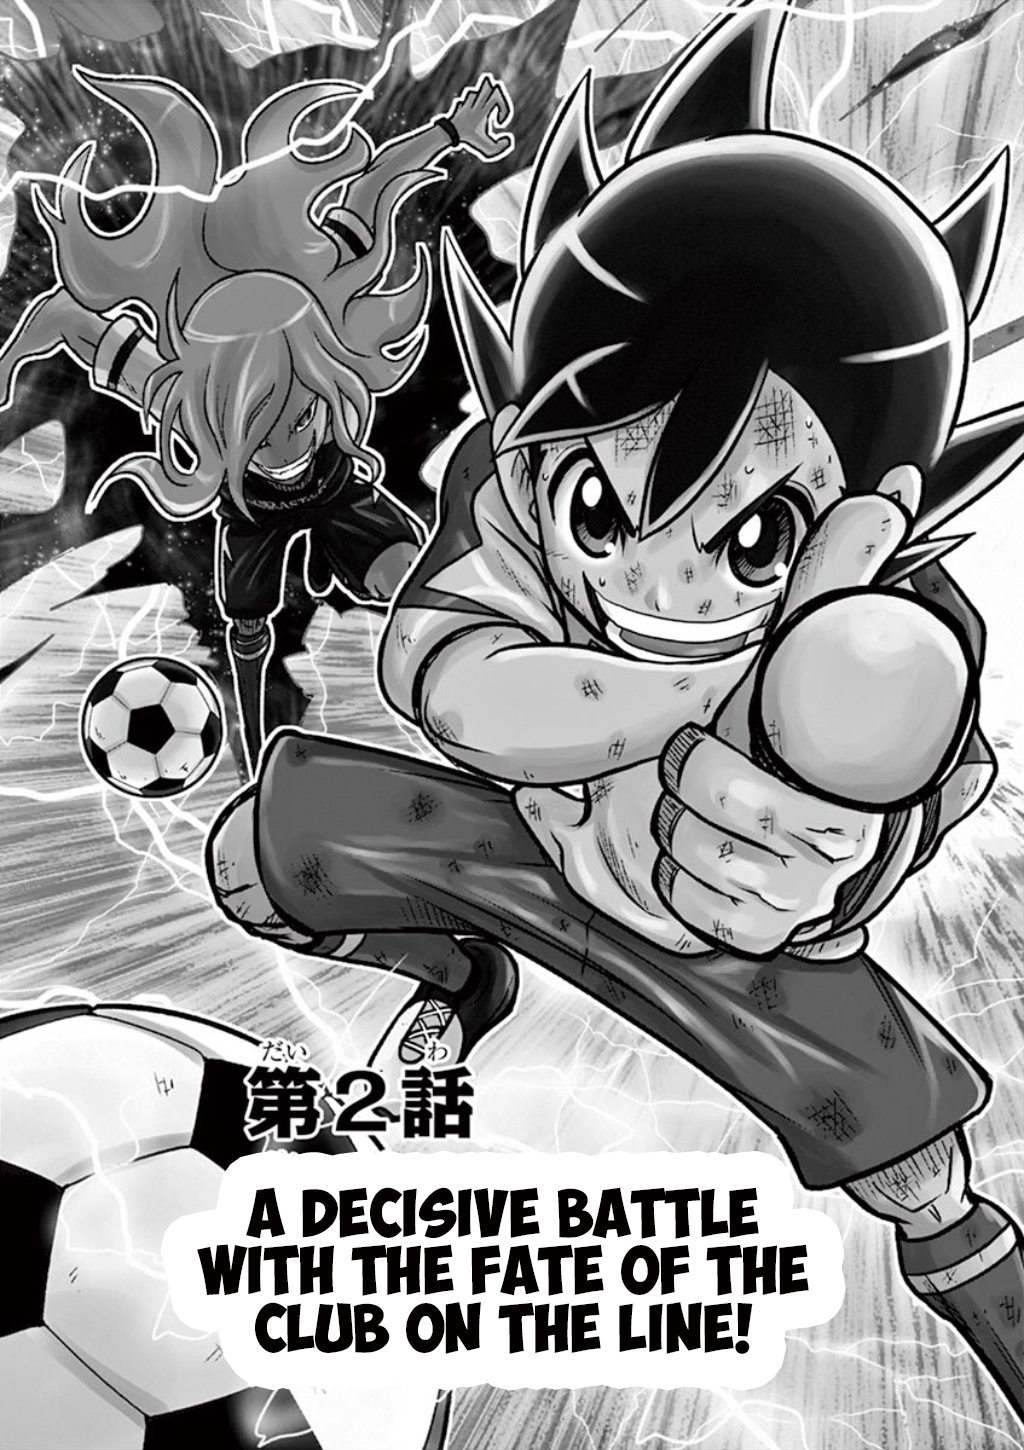 Inazuma Eleven: Ares No Tenbin Vol.1 Chapter 2: A Decisive Battle With The Fate Of The Club On The Line! - Picture 1